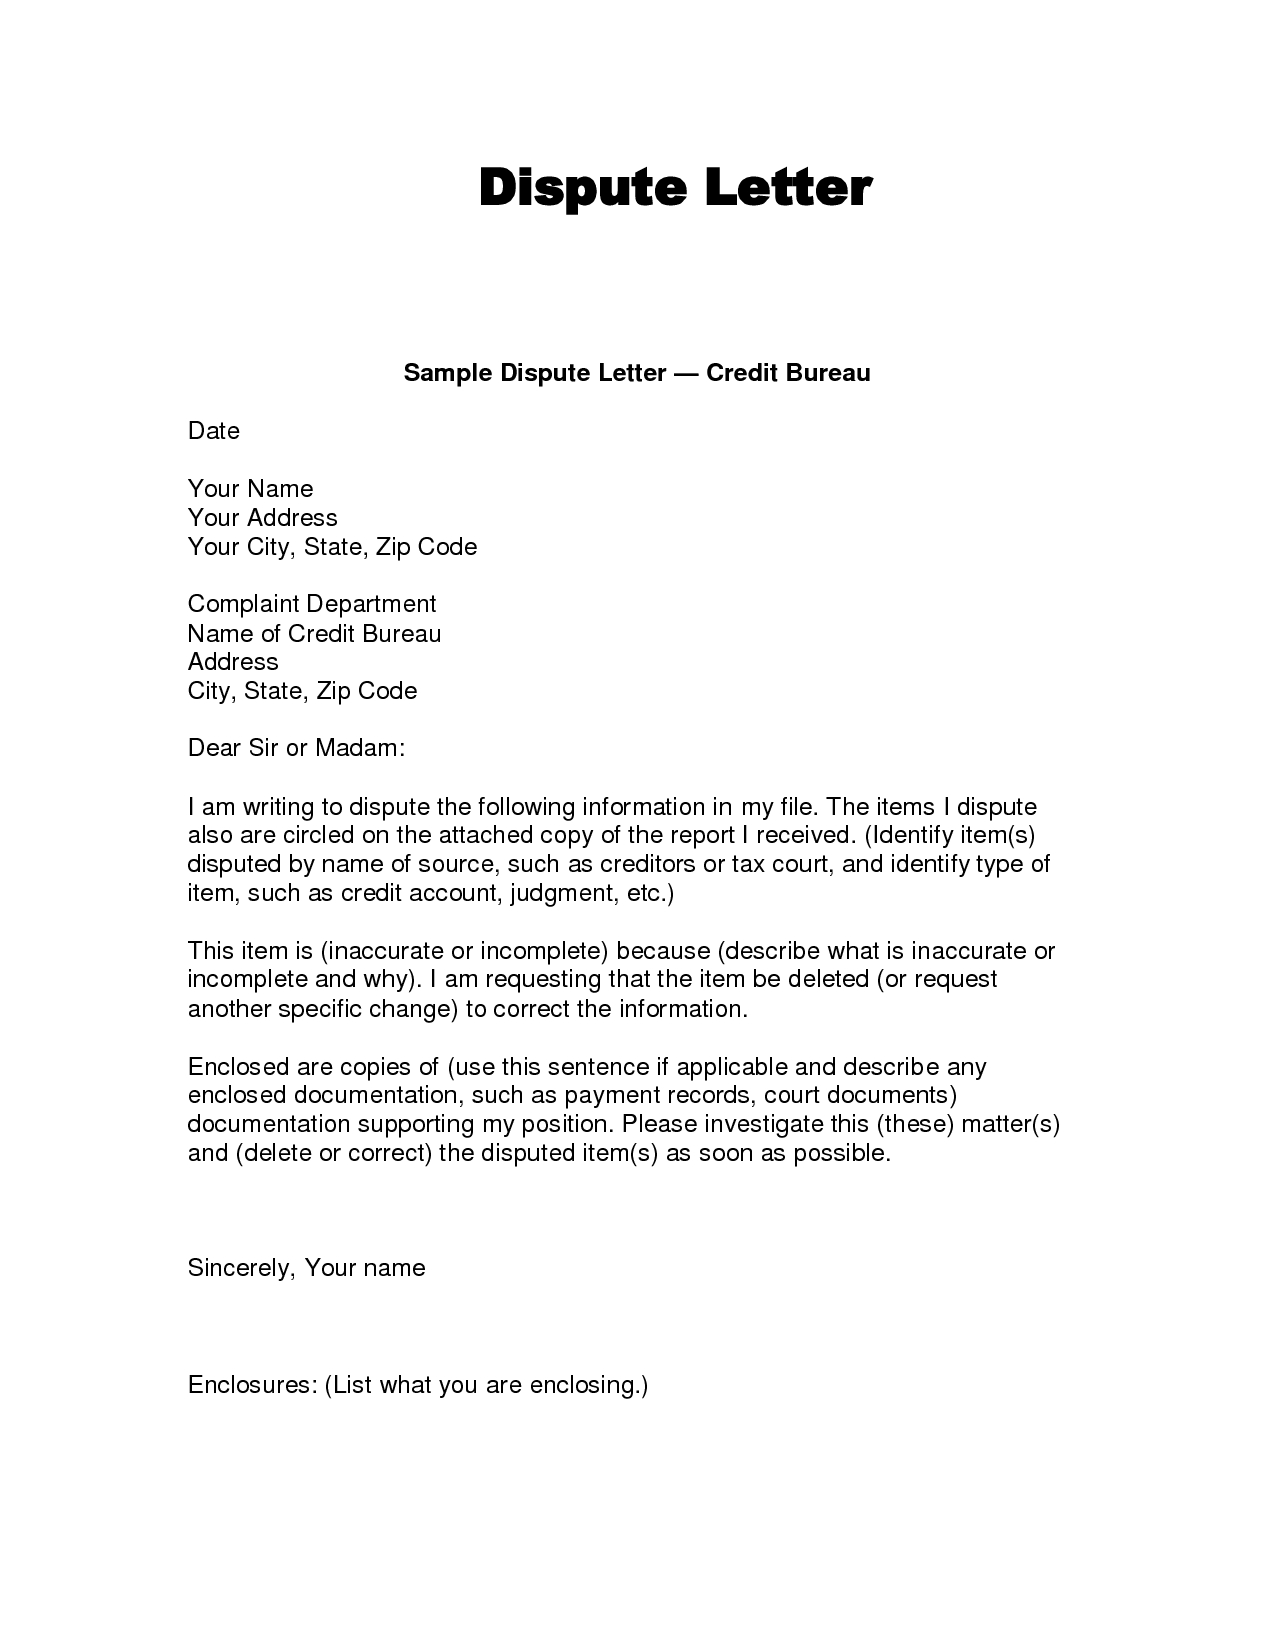 Writing Dispute Letter Format  Make A Habit   Credit Bureaus within Dispute Letter To Creditor Template